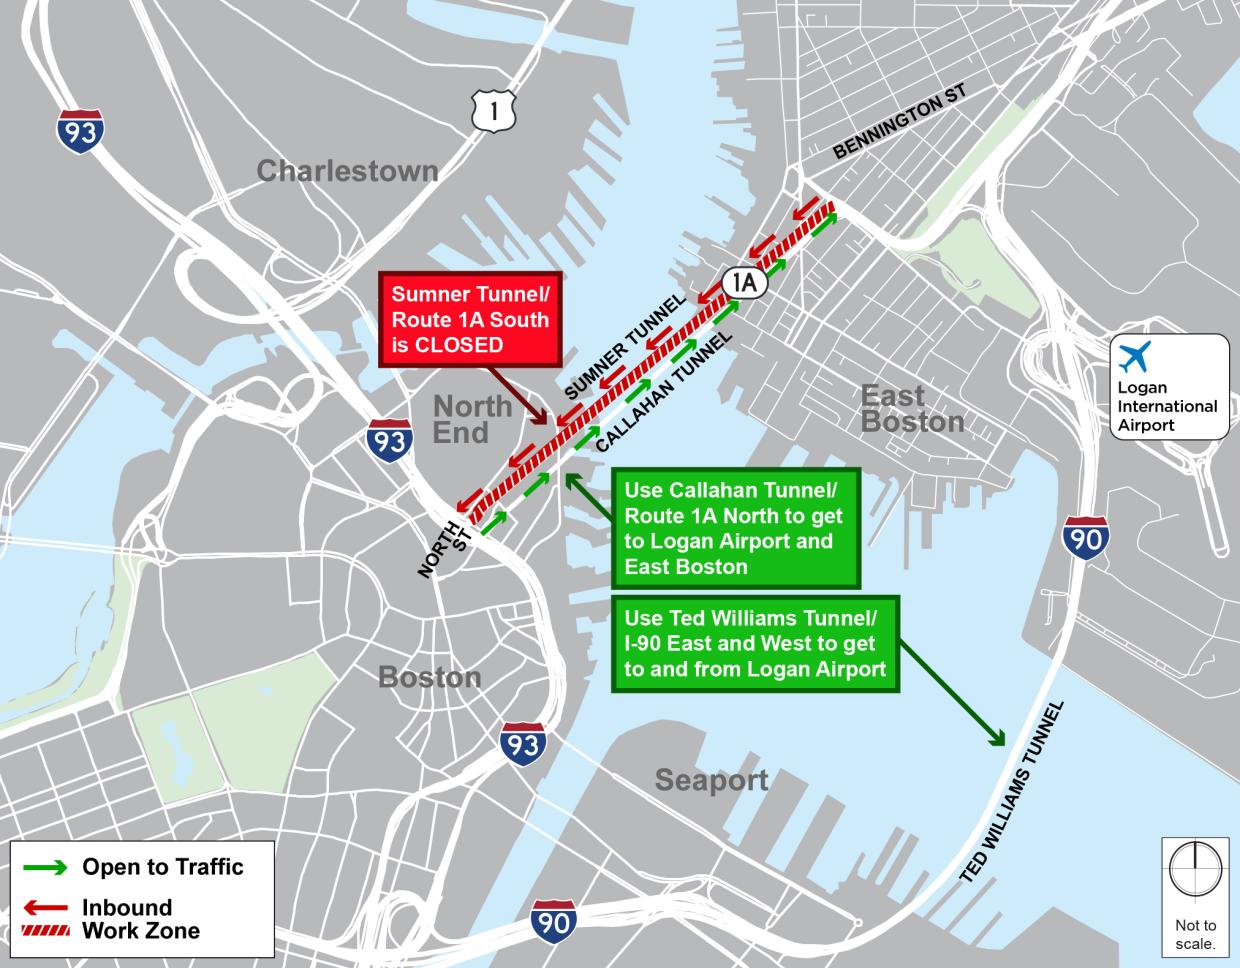 Map of Boston and Sumner Tunnel closure details. Use Callahan Tunnel/Route 1A to get to Logan Airport and East Boston. Use Ted Williams Tunnel/I-90 East and West to get to and from Logan Airport.